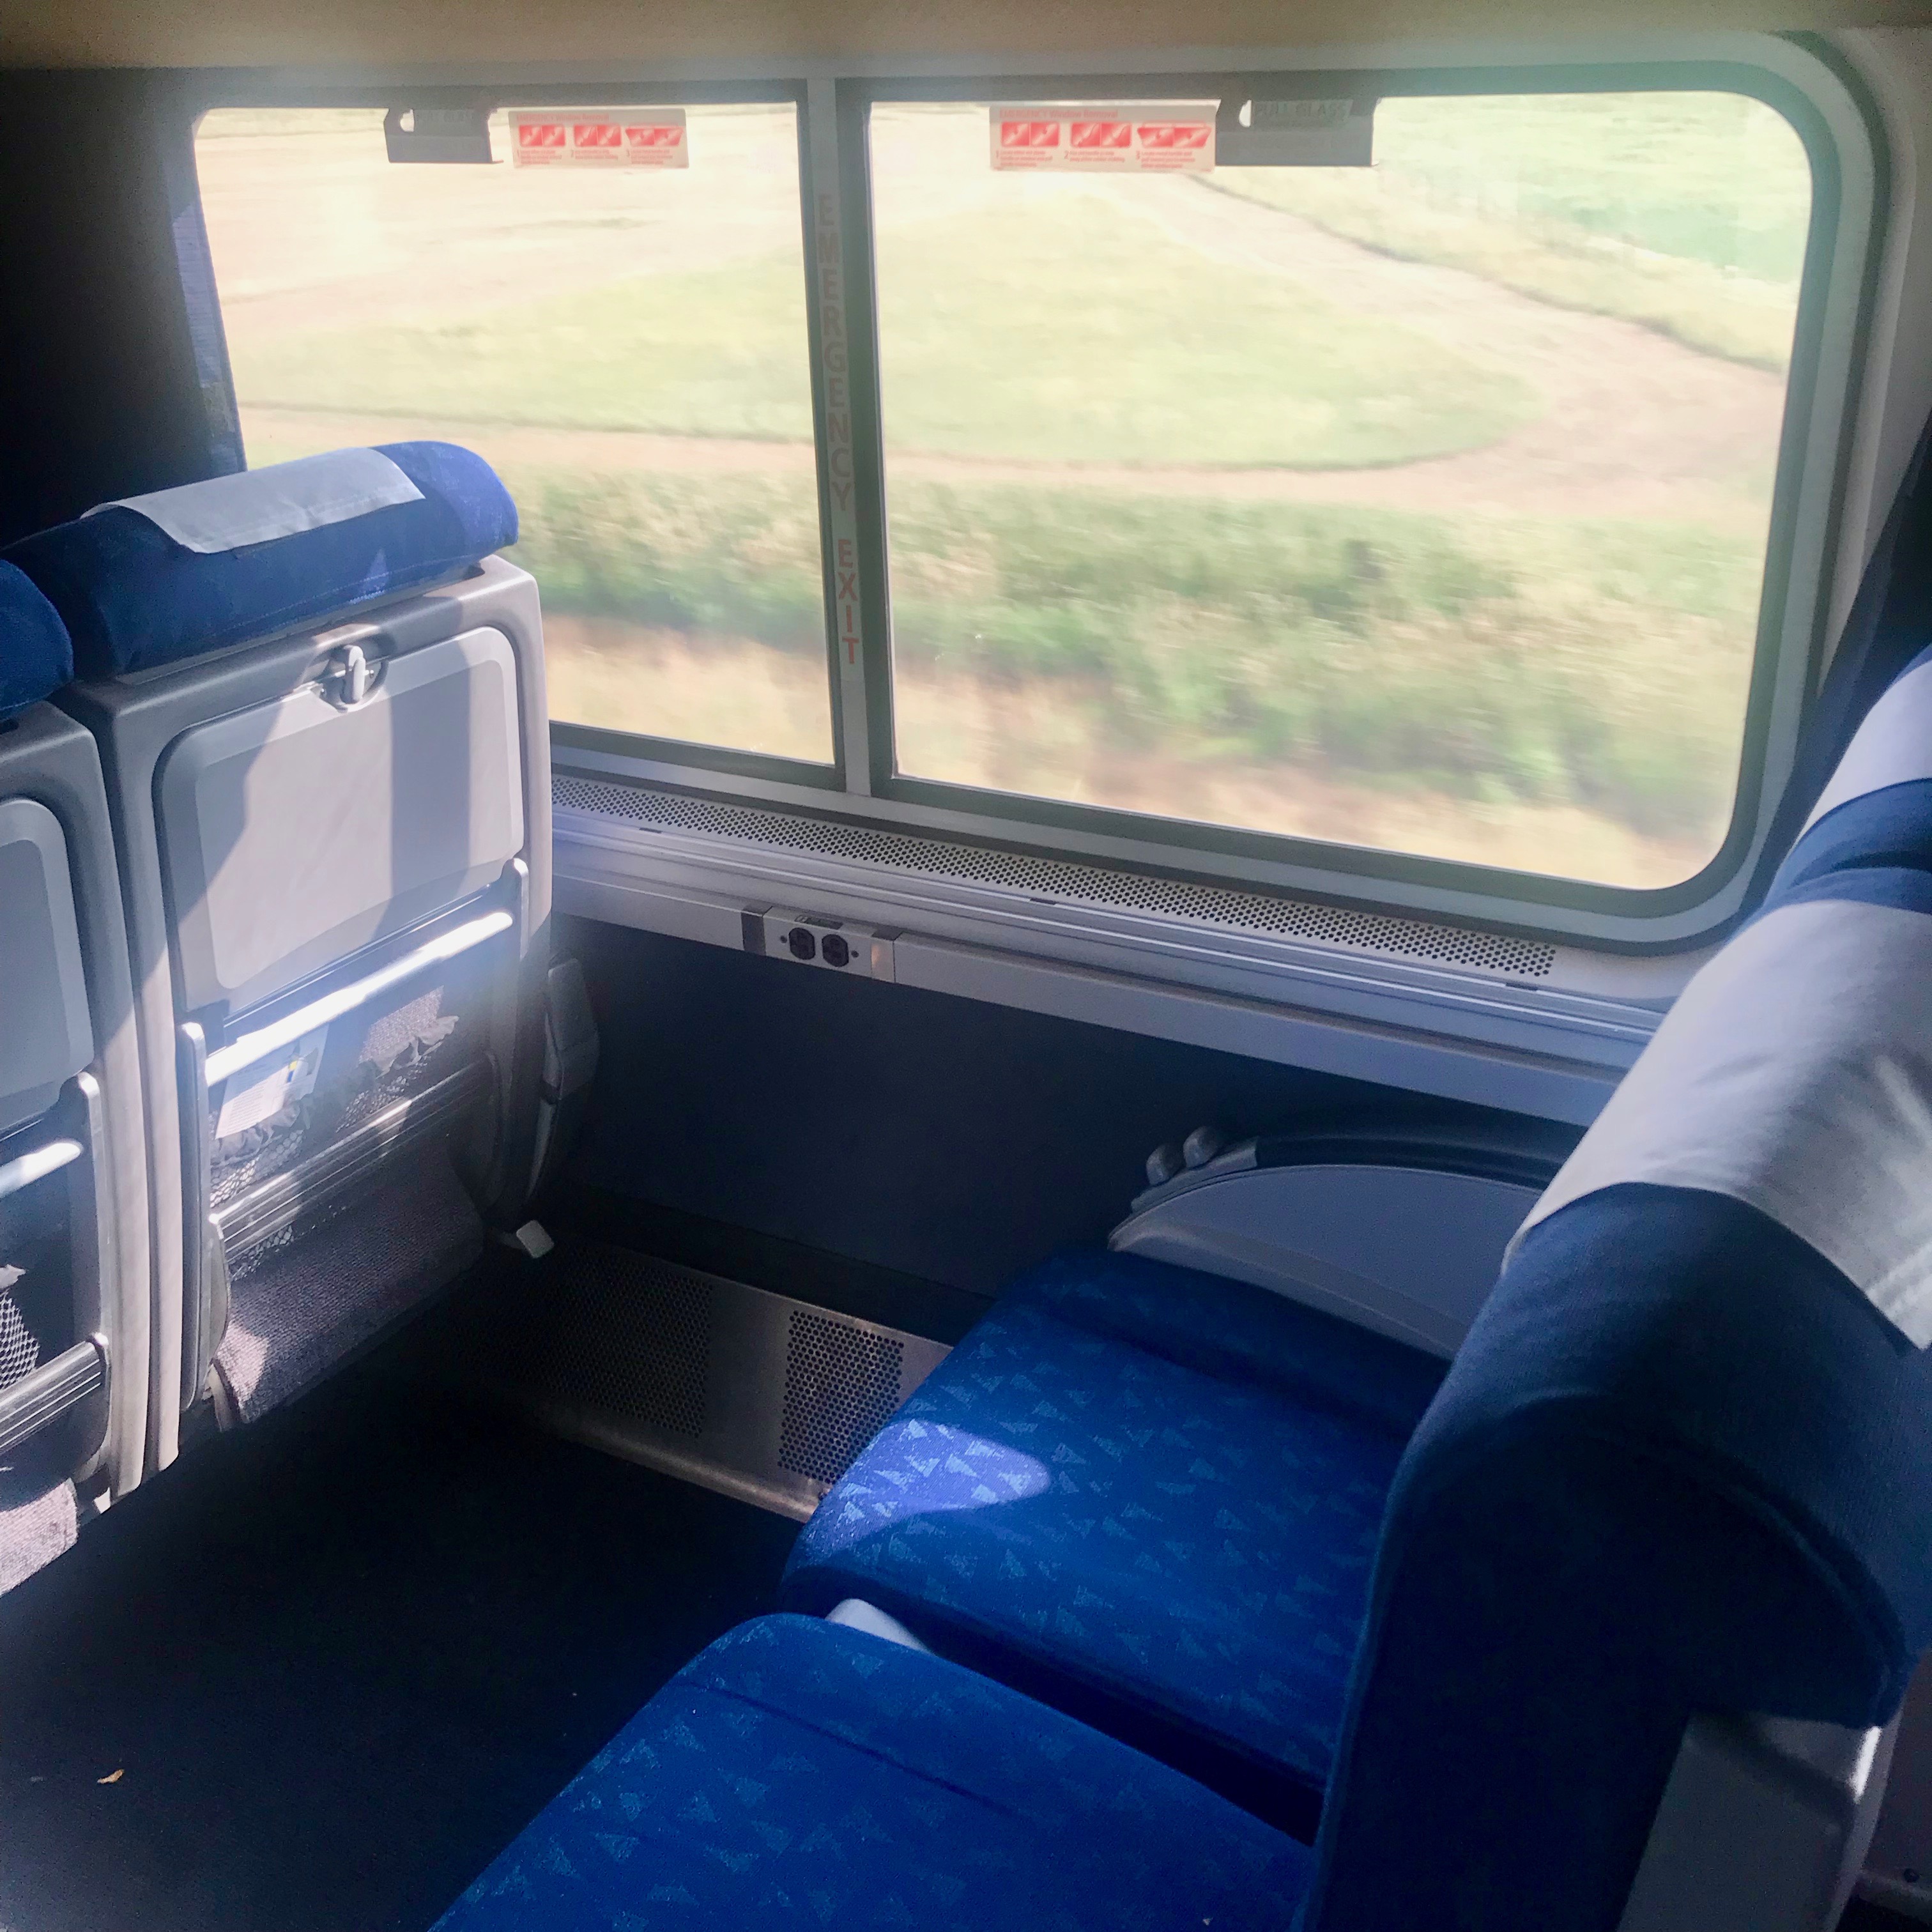 Coach seats on Amtrak Empire Builder train between Seattle and Chicago.  The seats have plenty of legroom and seem to recline enough to sleep over night.  